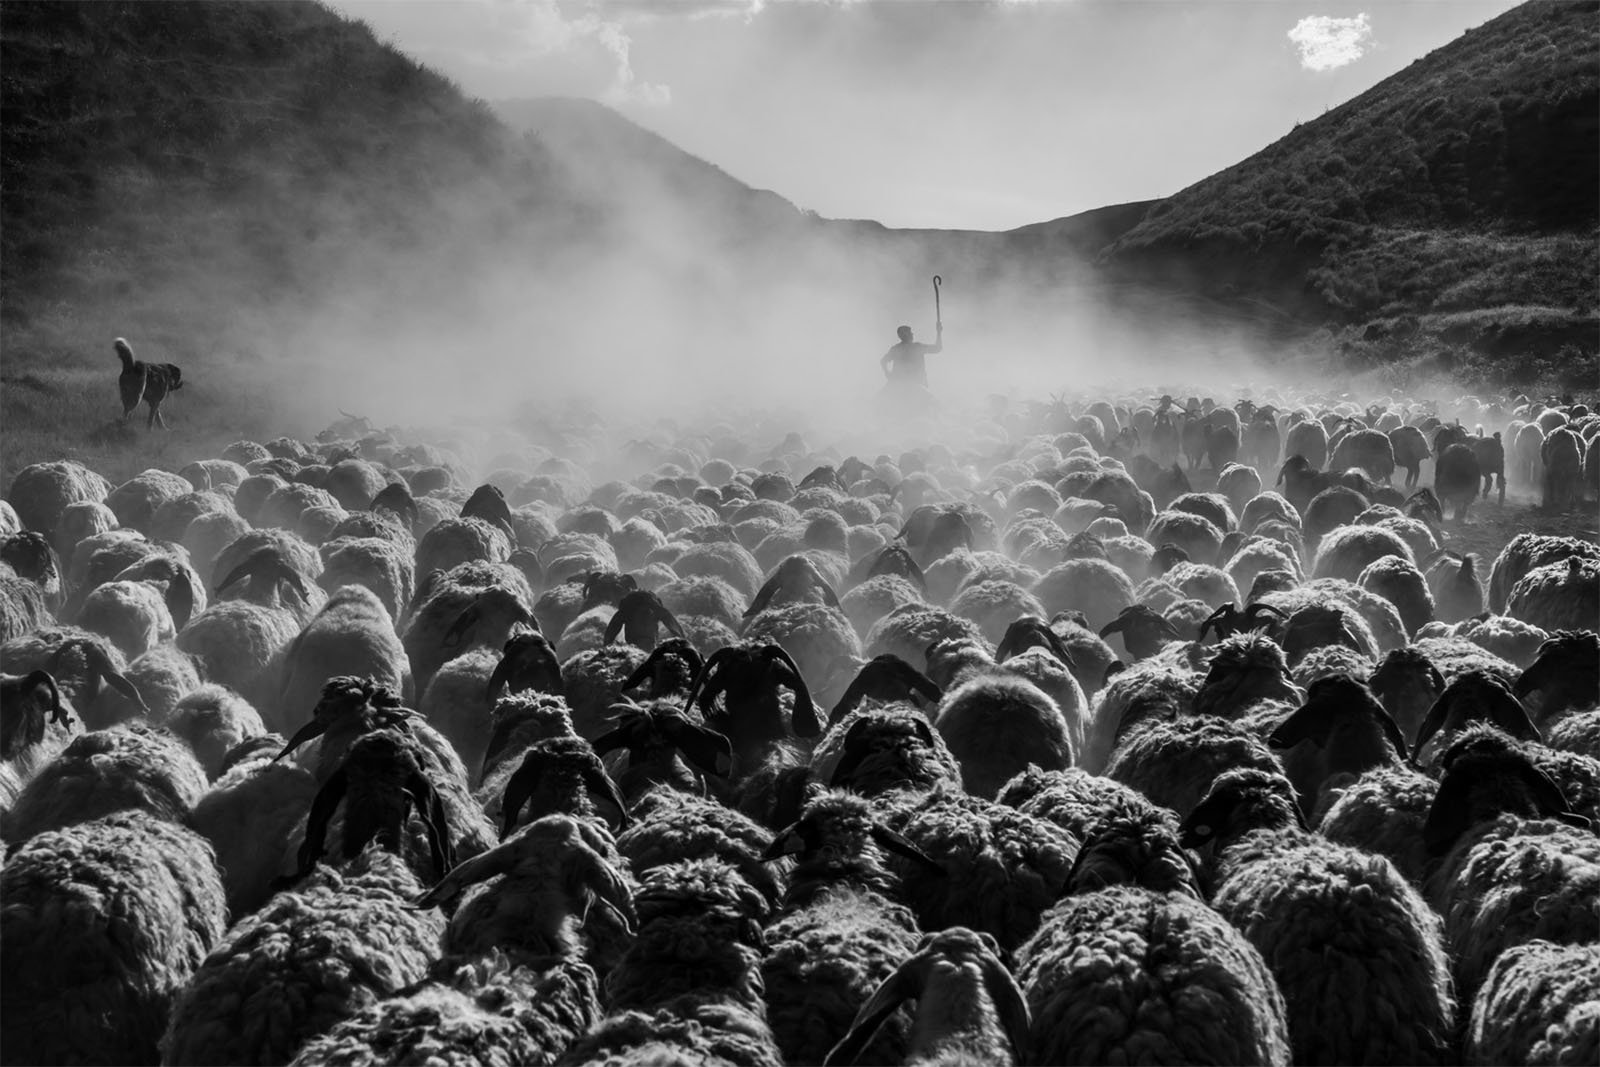 A black and white photo shows a large flock of sheep being herded through a dusty valley. A shepherd holding a staff is seen in the distance, with a dog nearby. The scene is enveloped in a haze from the stirred-up dust, and hills rise on either side.